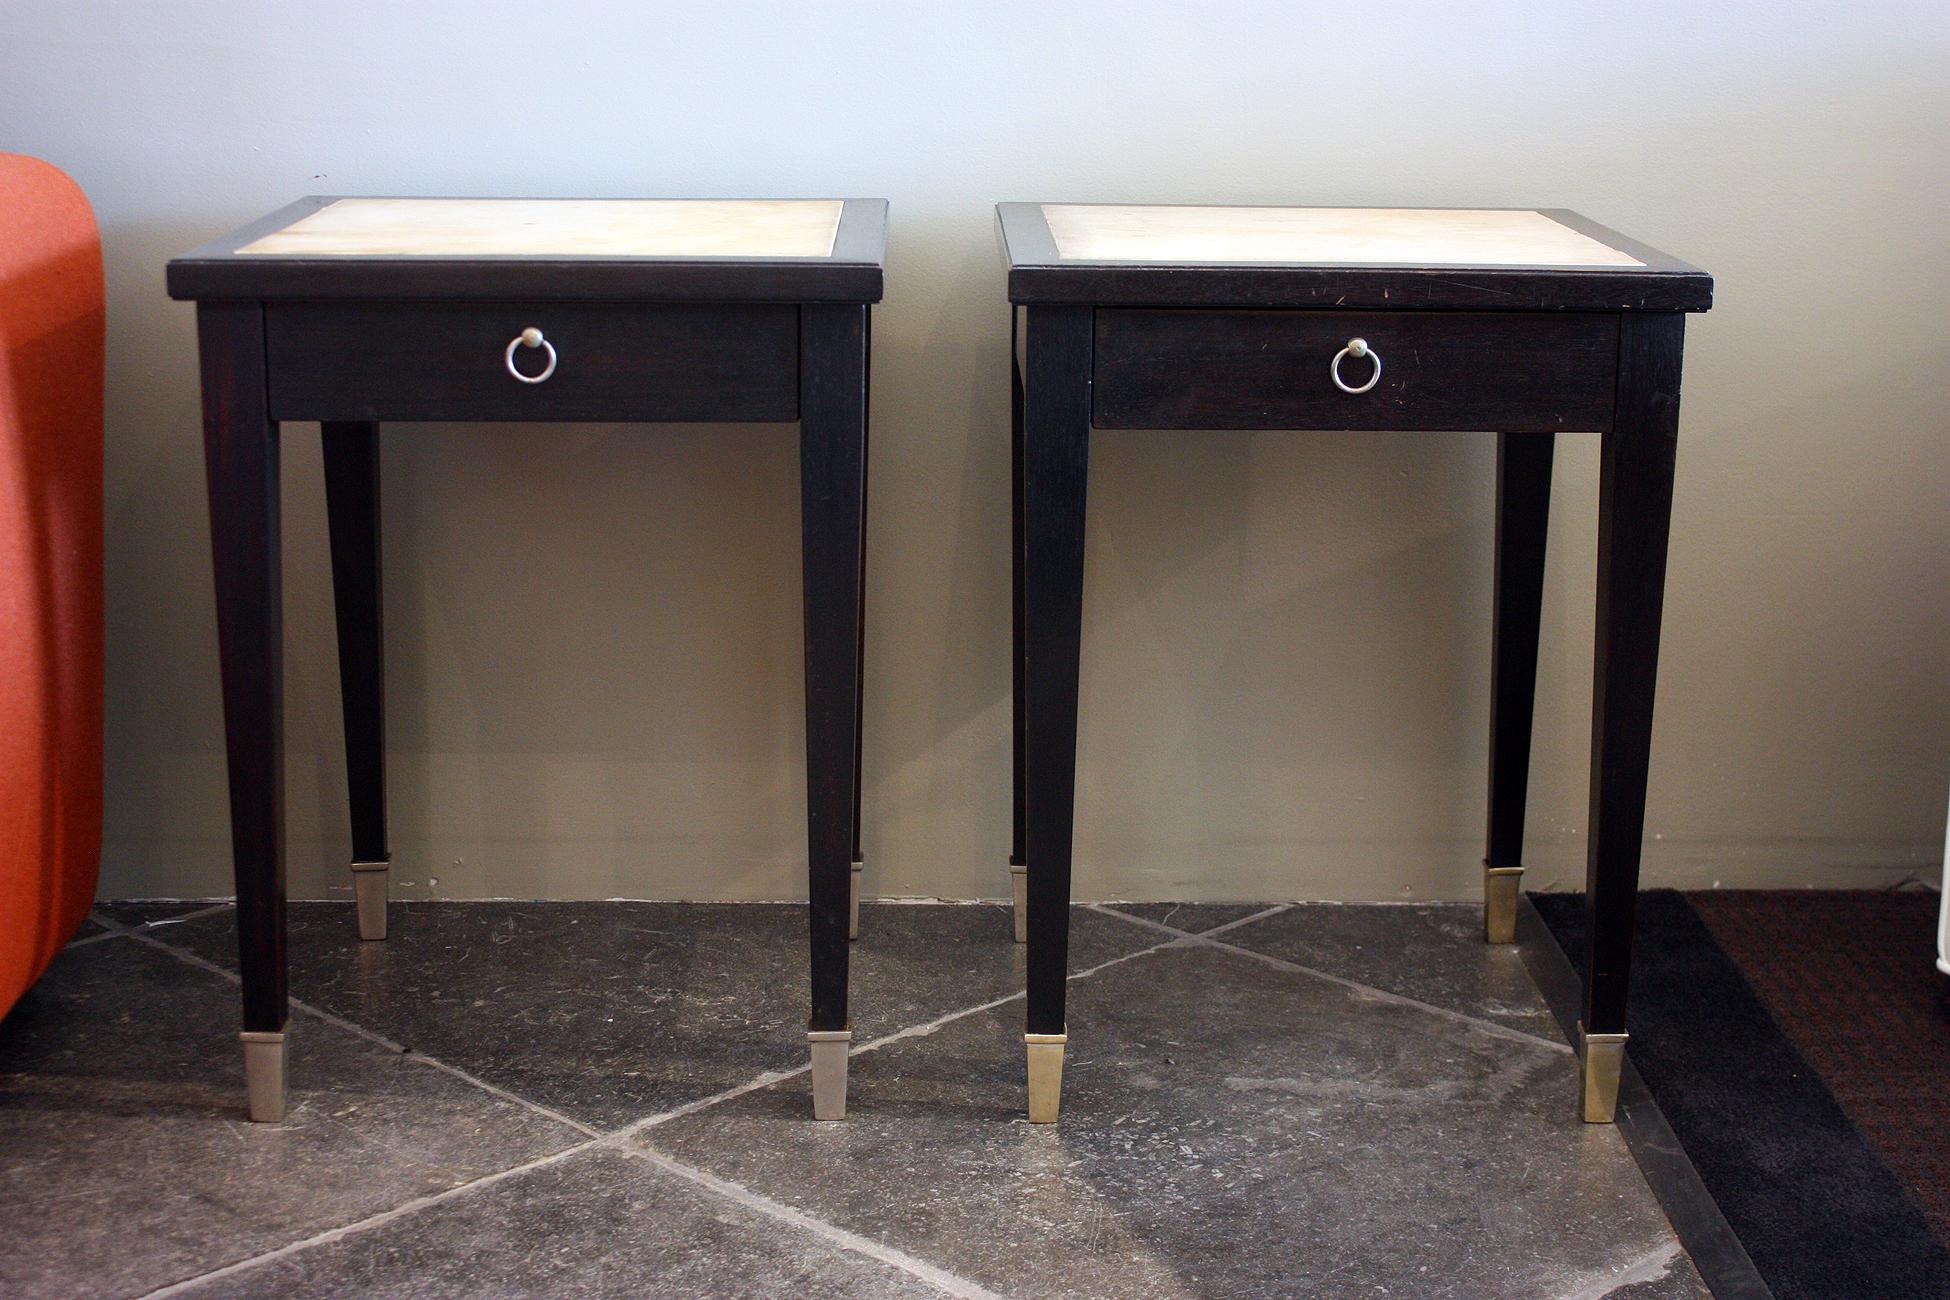 Jacques Adnet, (1900-1984)
Very rare pair of side tables in black lacquered wood, parchment, and silver plated bronze sabots. Each has one drawer with an oxidized brass ring handle.
France, 1940.
Drawer is in beach wood and ash. Structure is in a